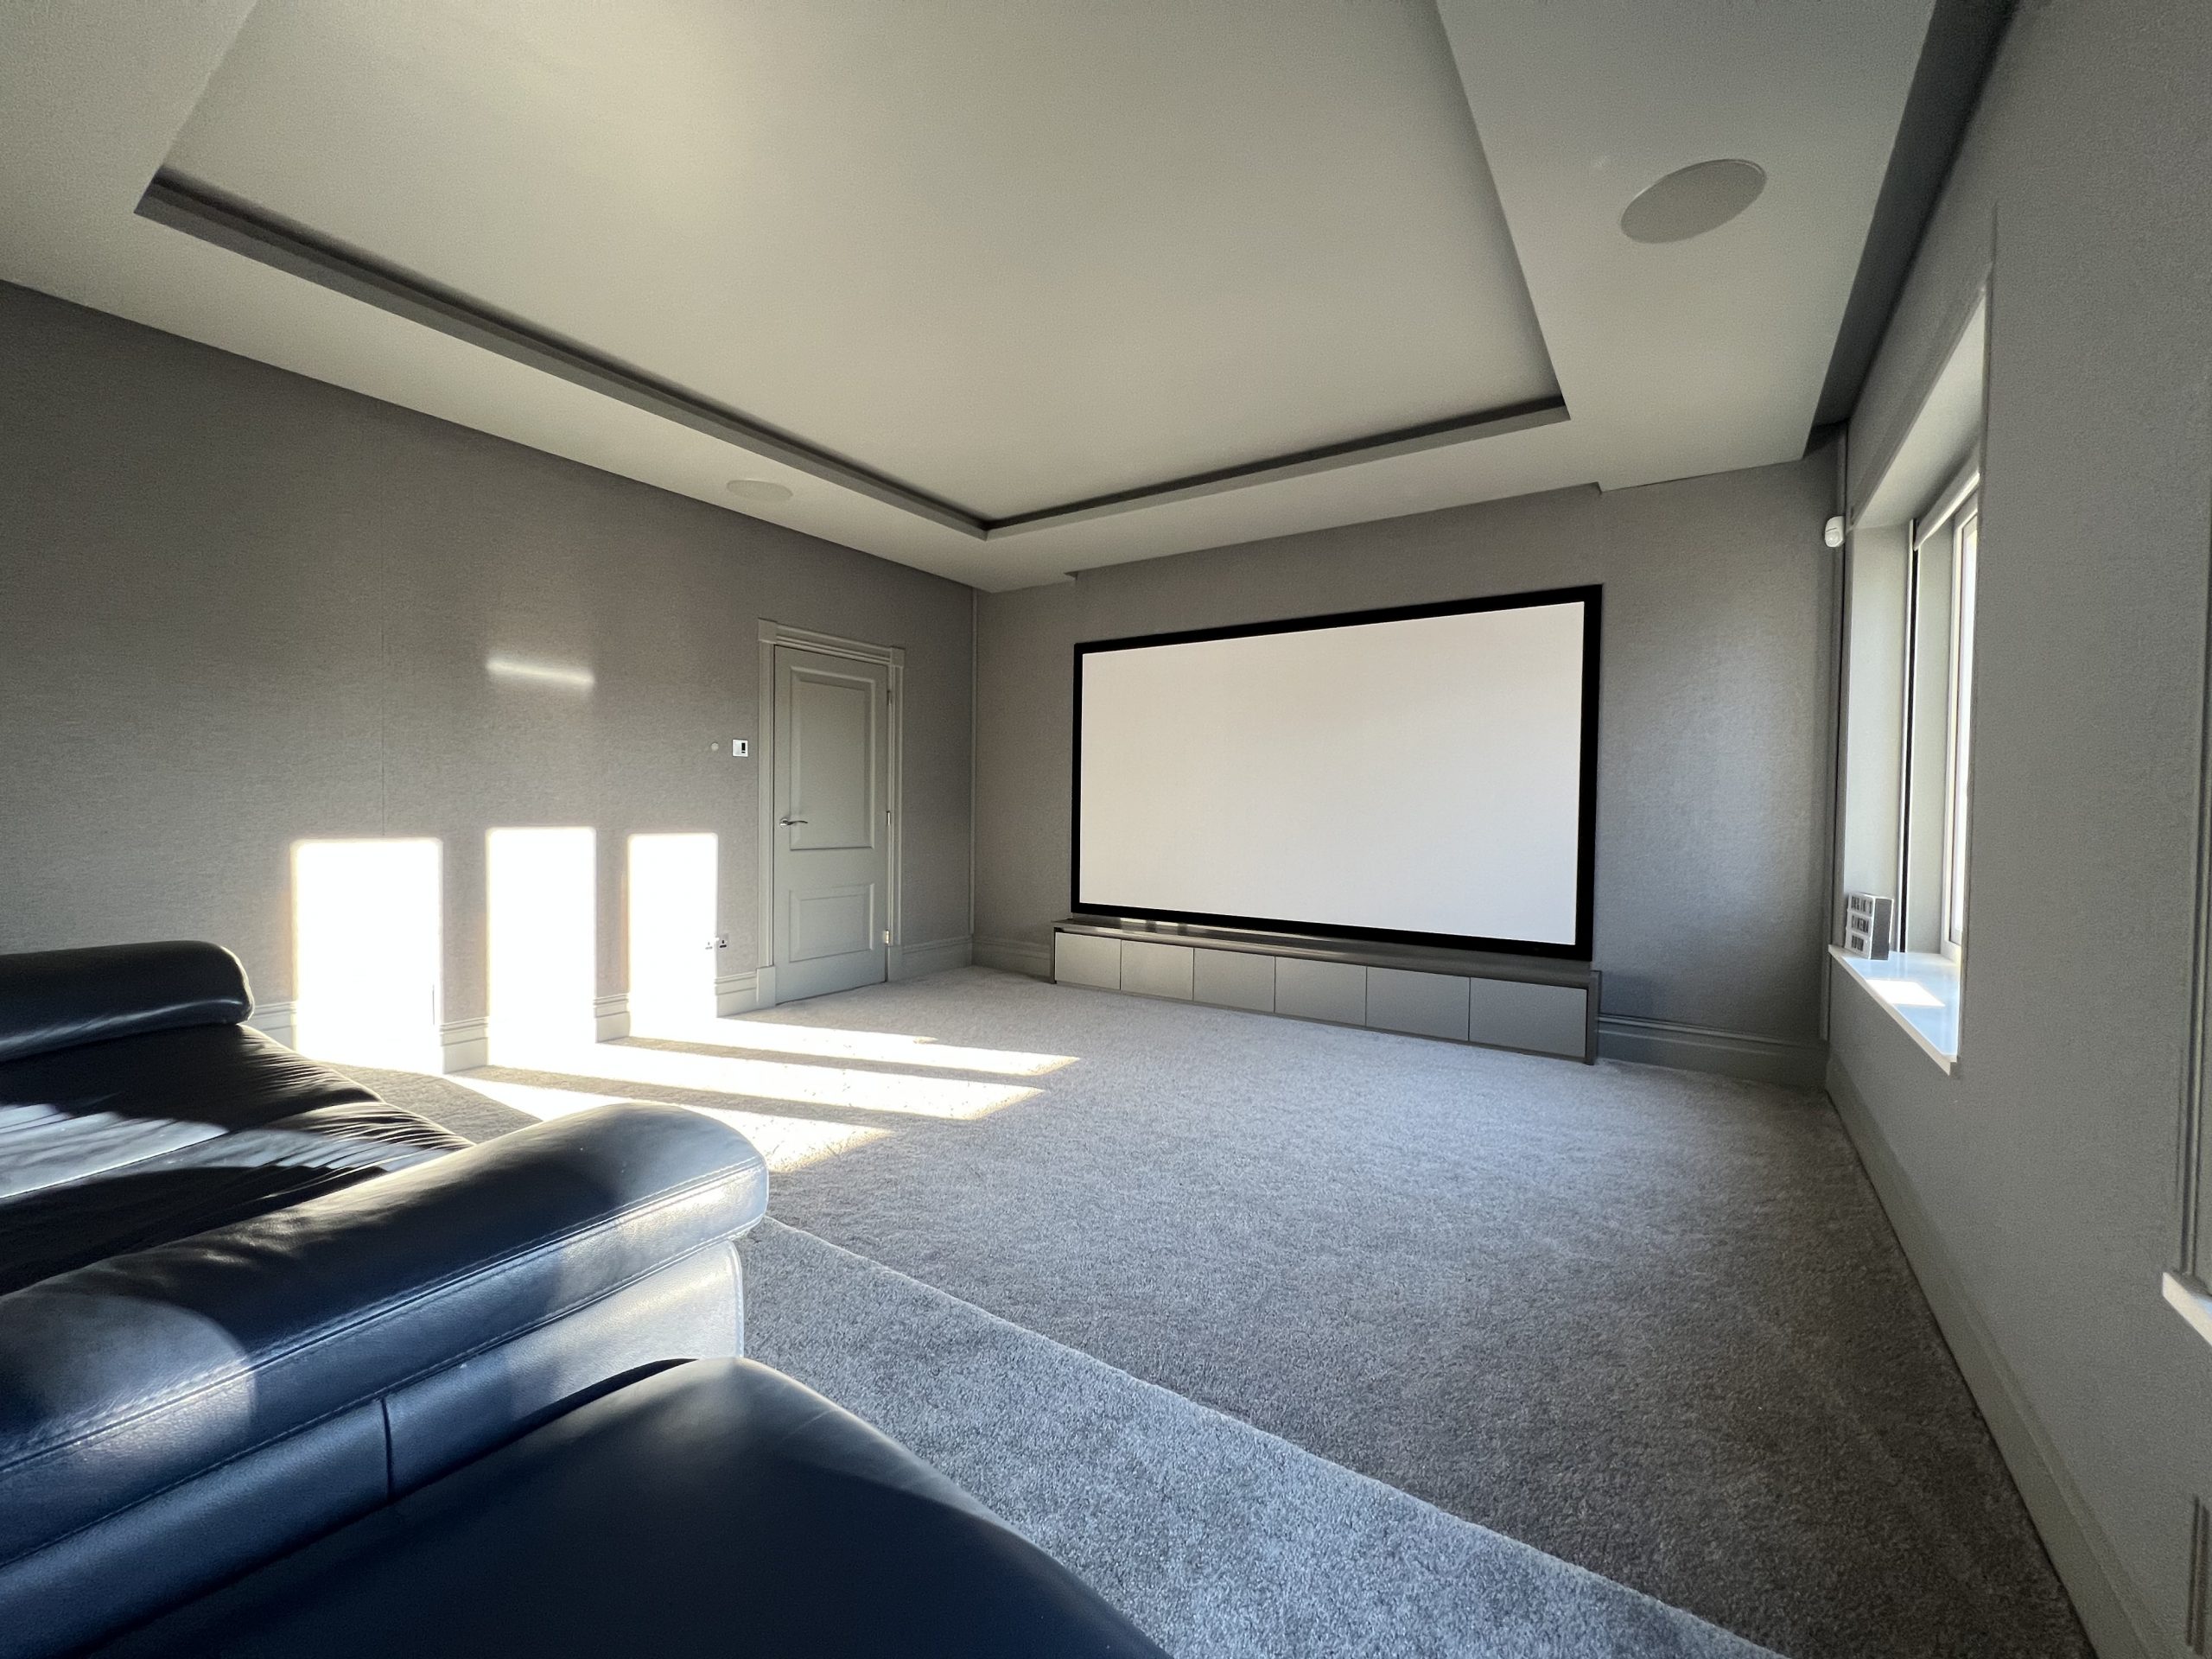 Daytime view of home cinema, with motorised blinds up